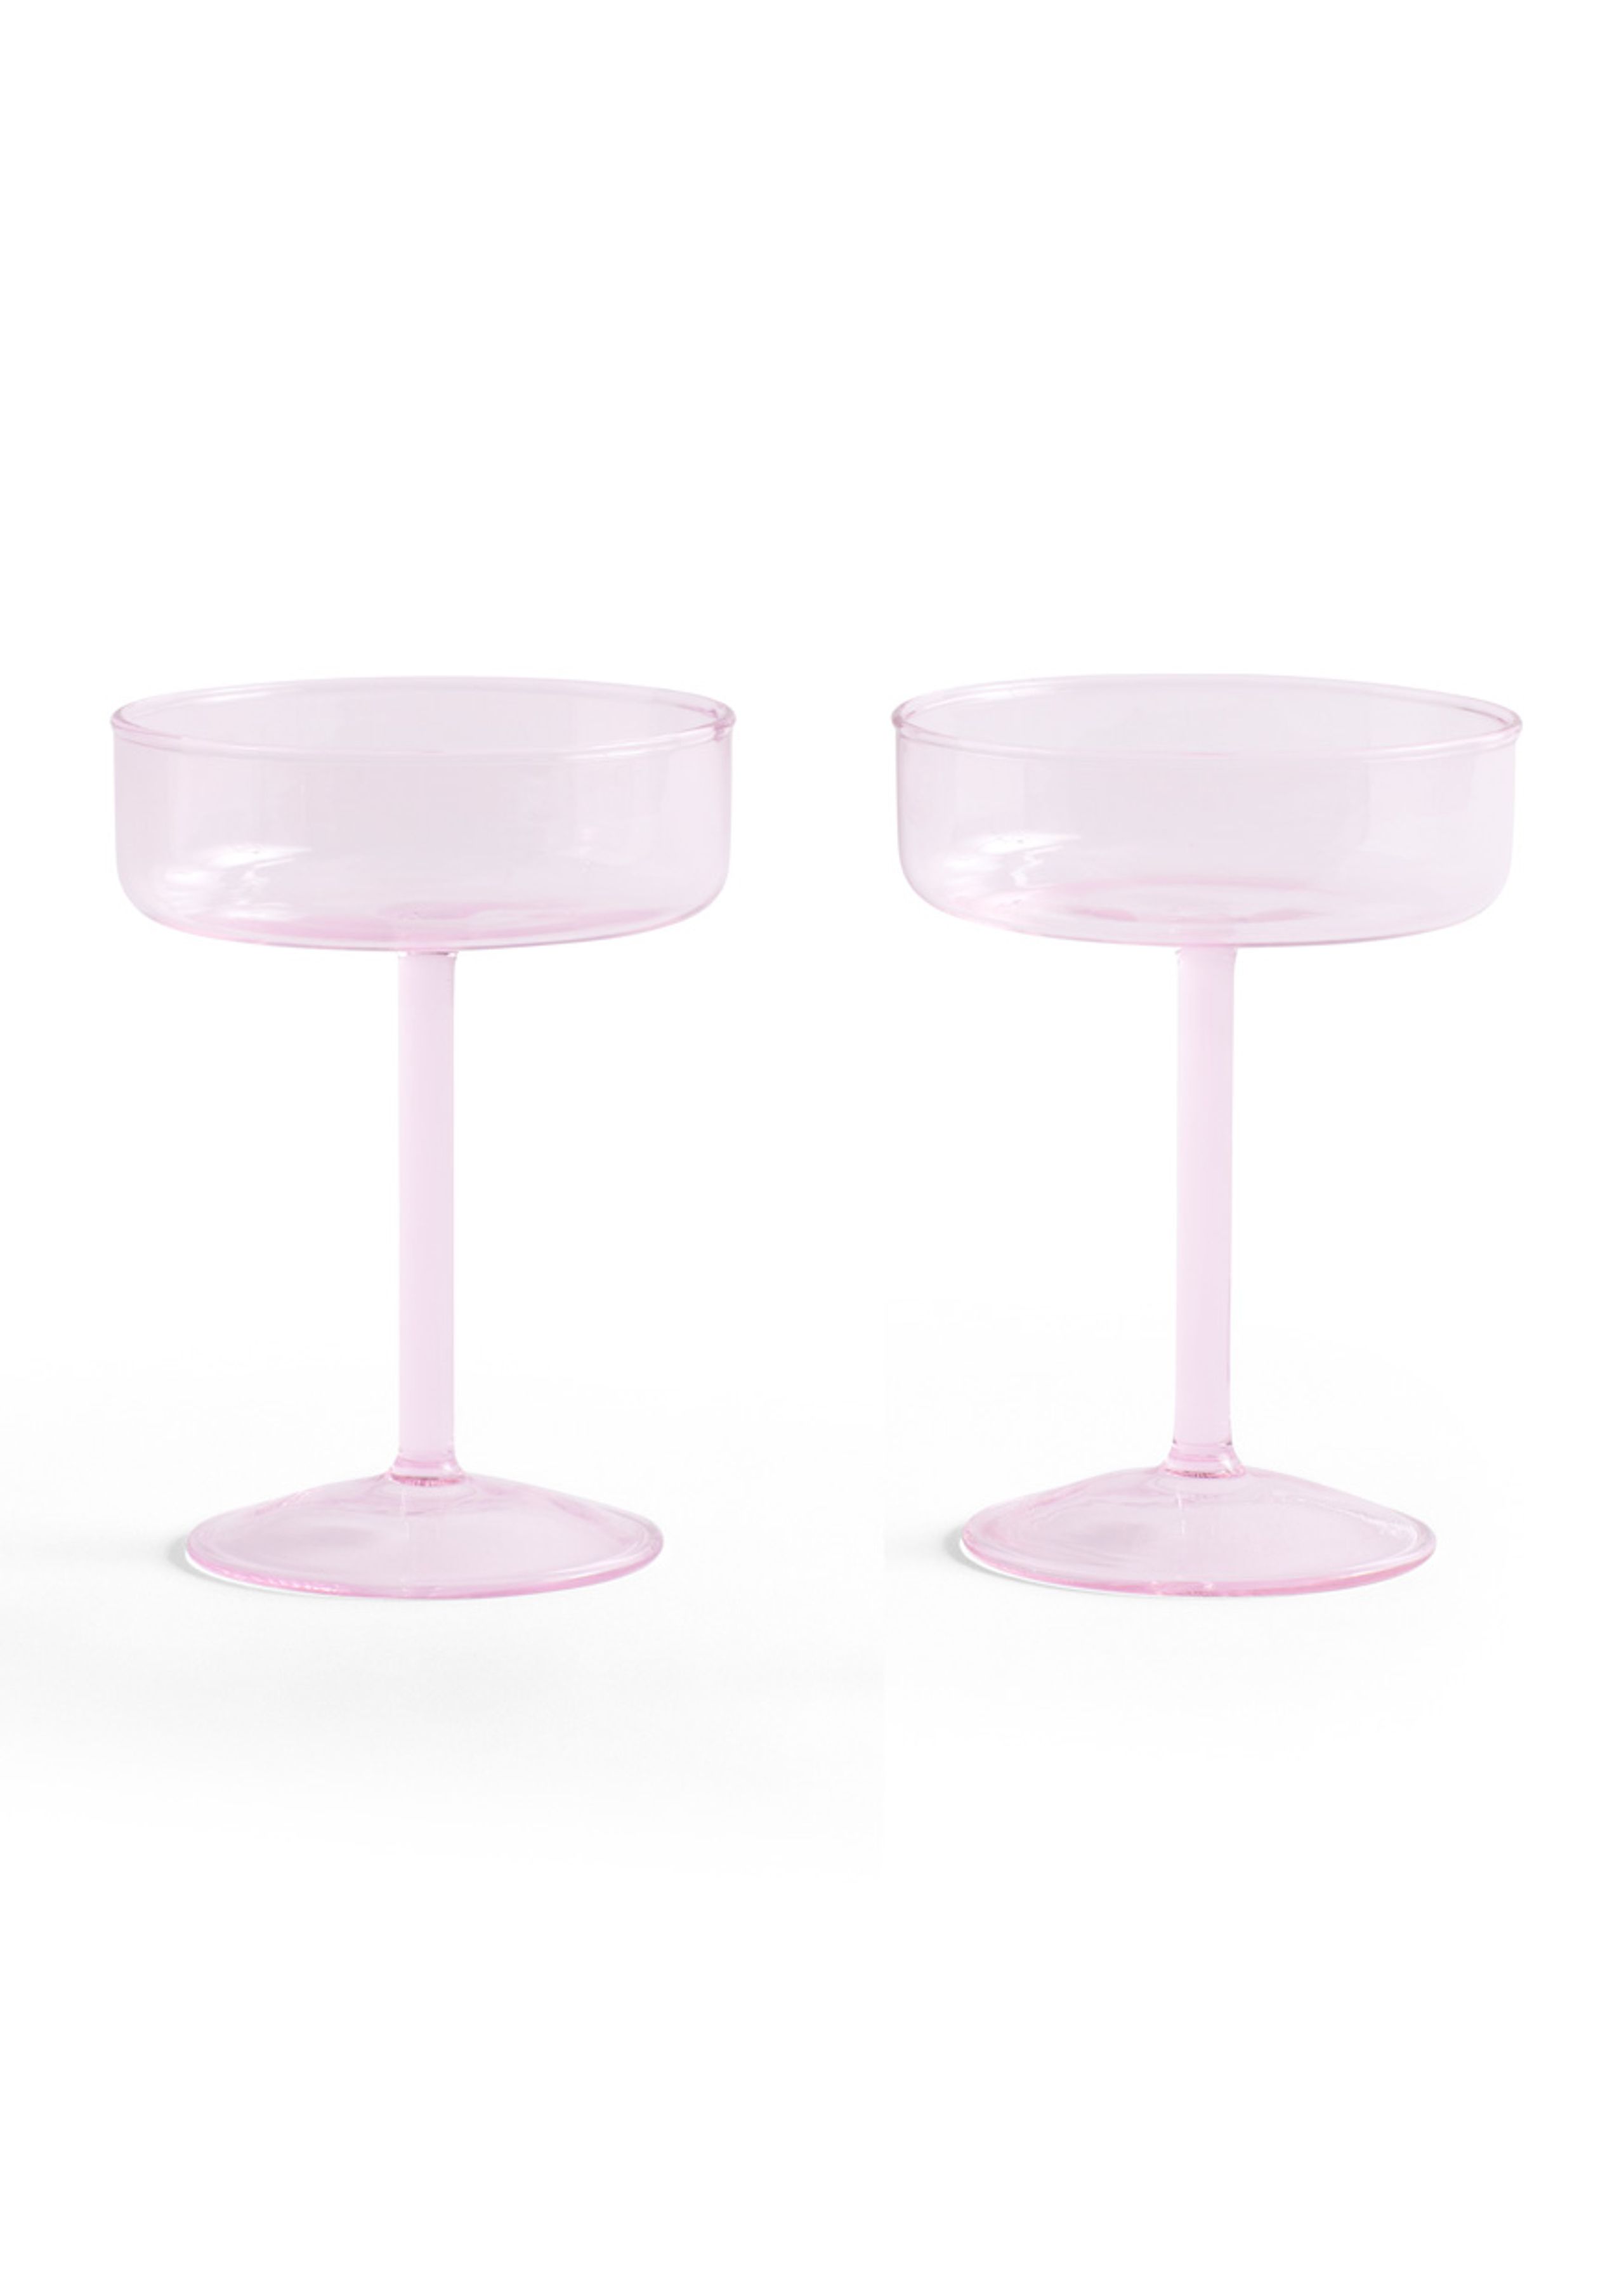 HAY - Copo de champanhe - Tint Coupe Glass - Pink - Set of 2